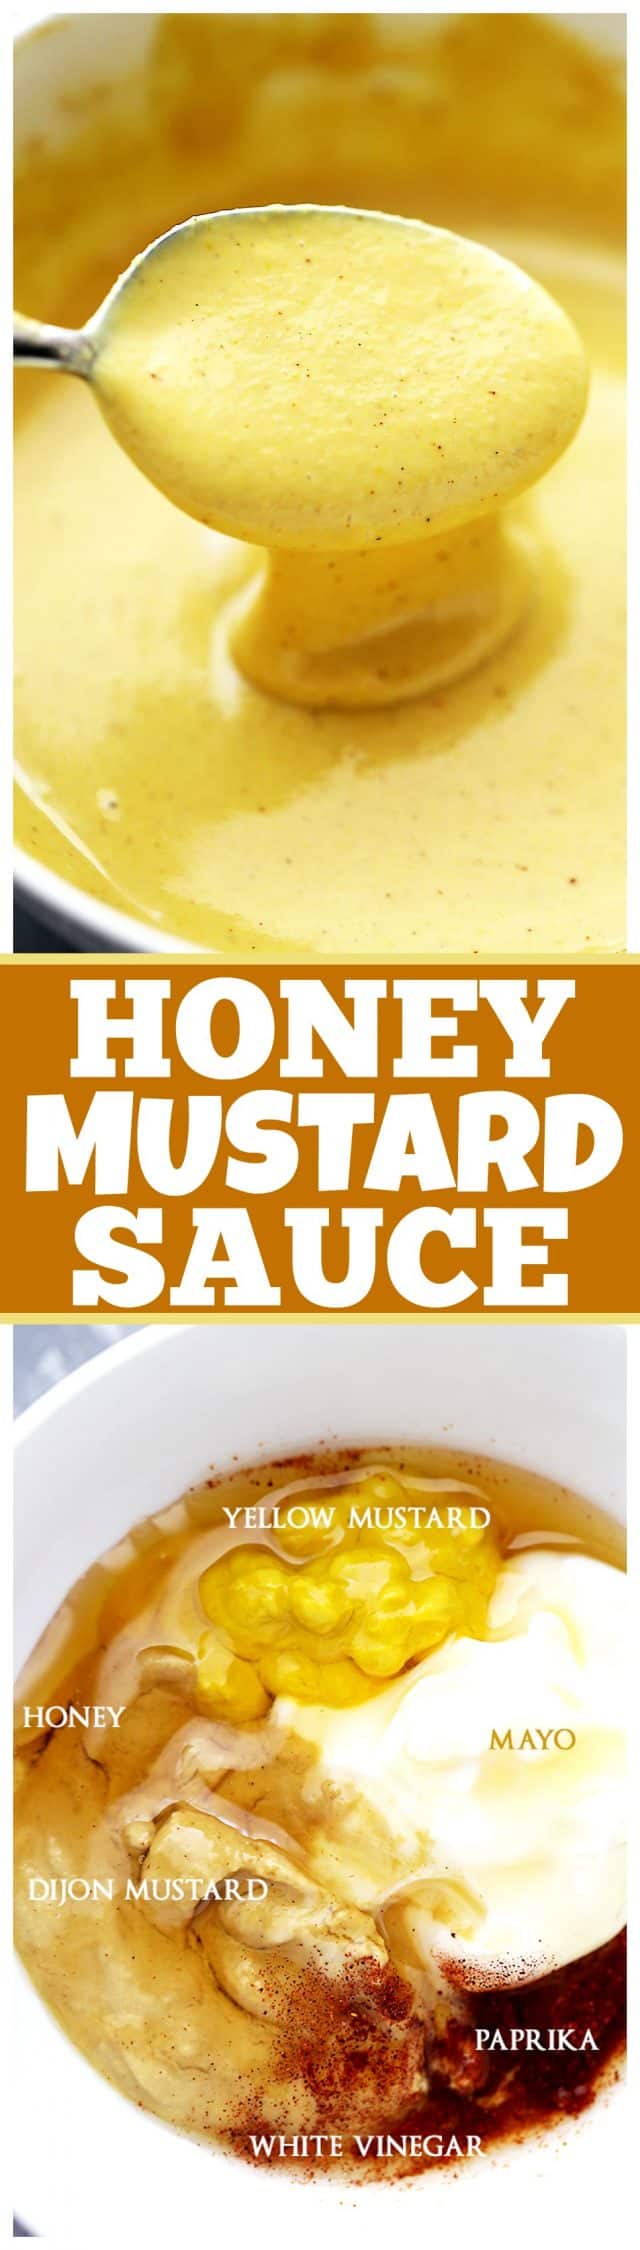 Honey Mustard Sauce Recipe - You are only 6 ingredients away from making your favorite dipping sauce right at home!